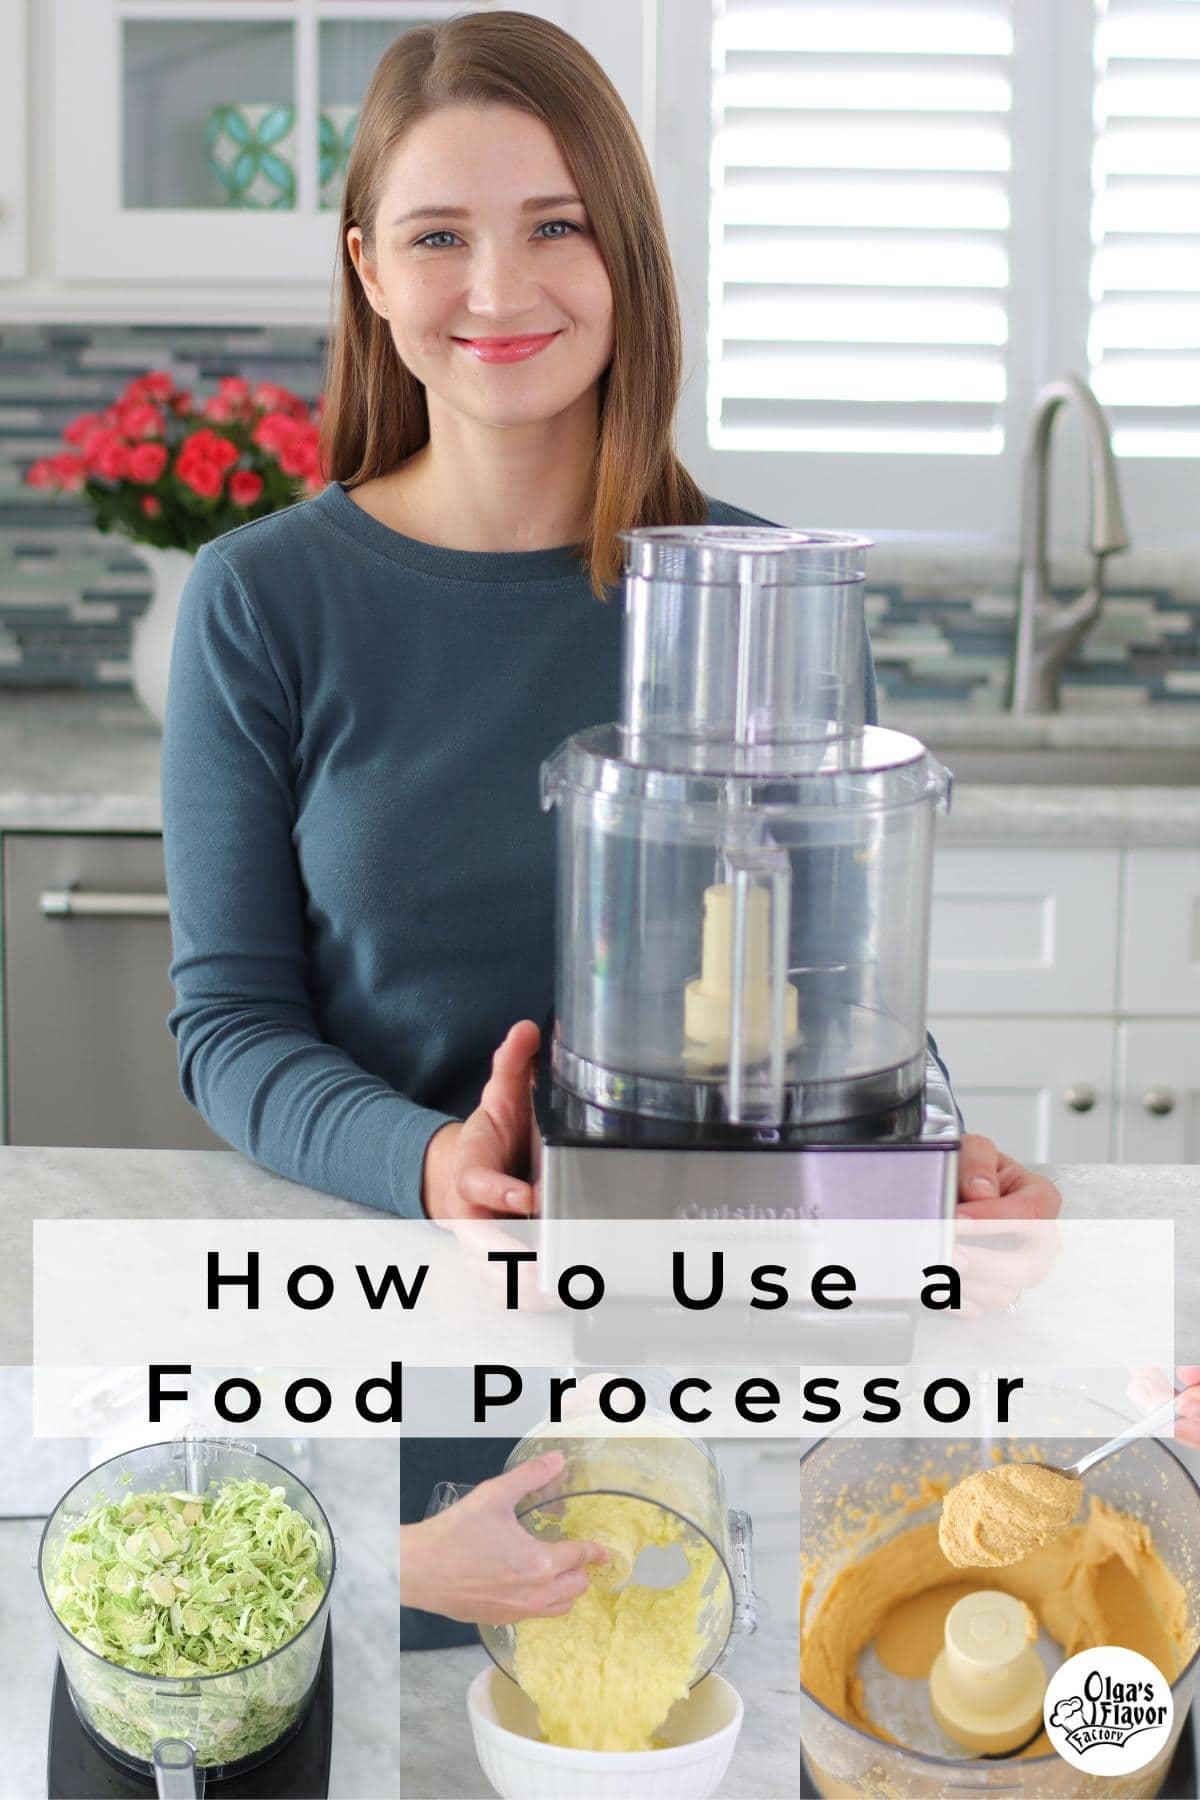 How to Use Food Processor Step by Step